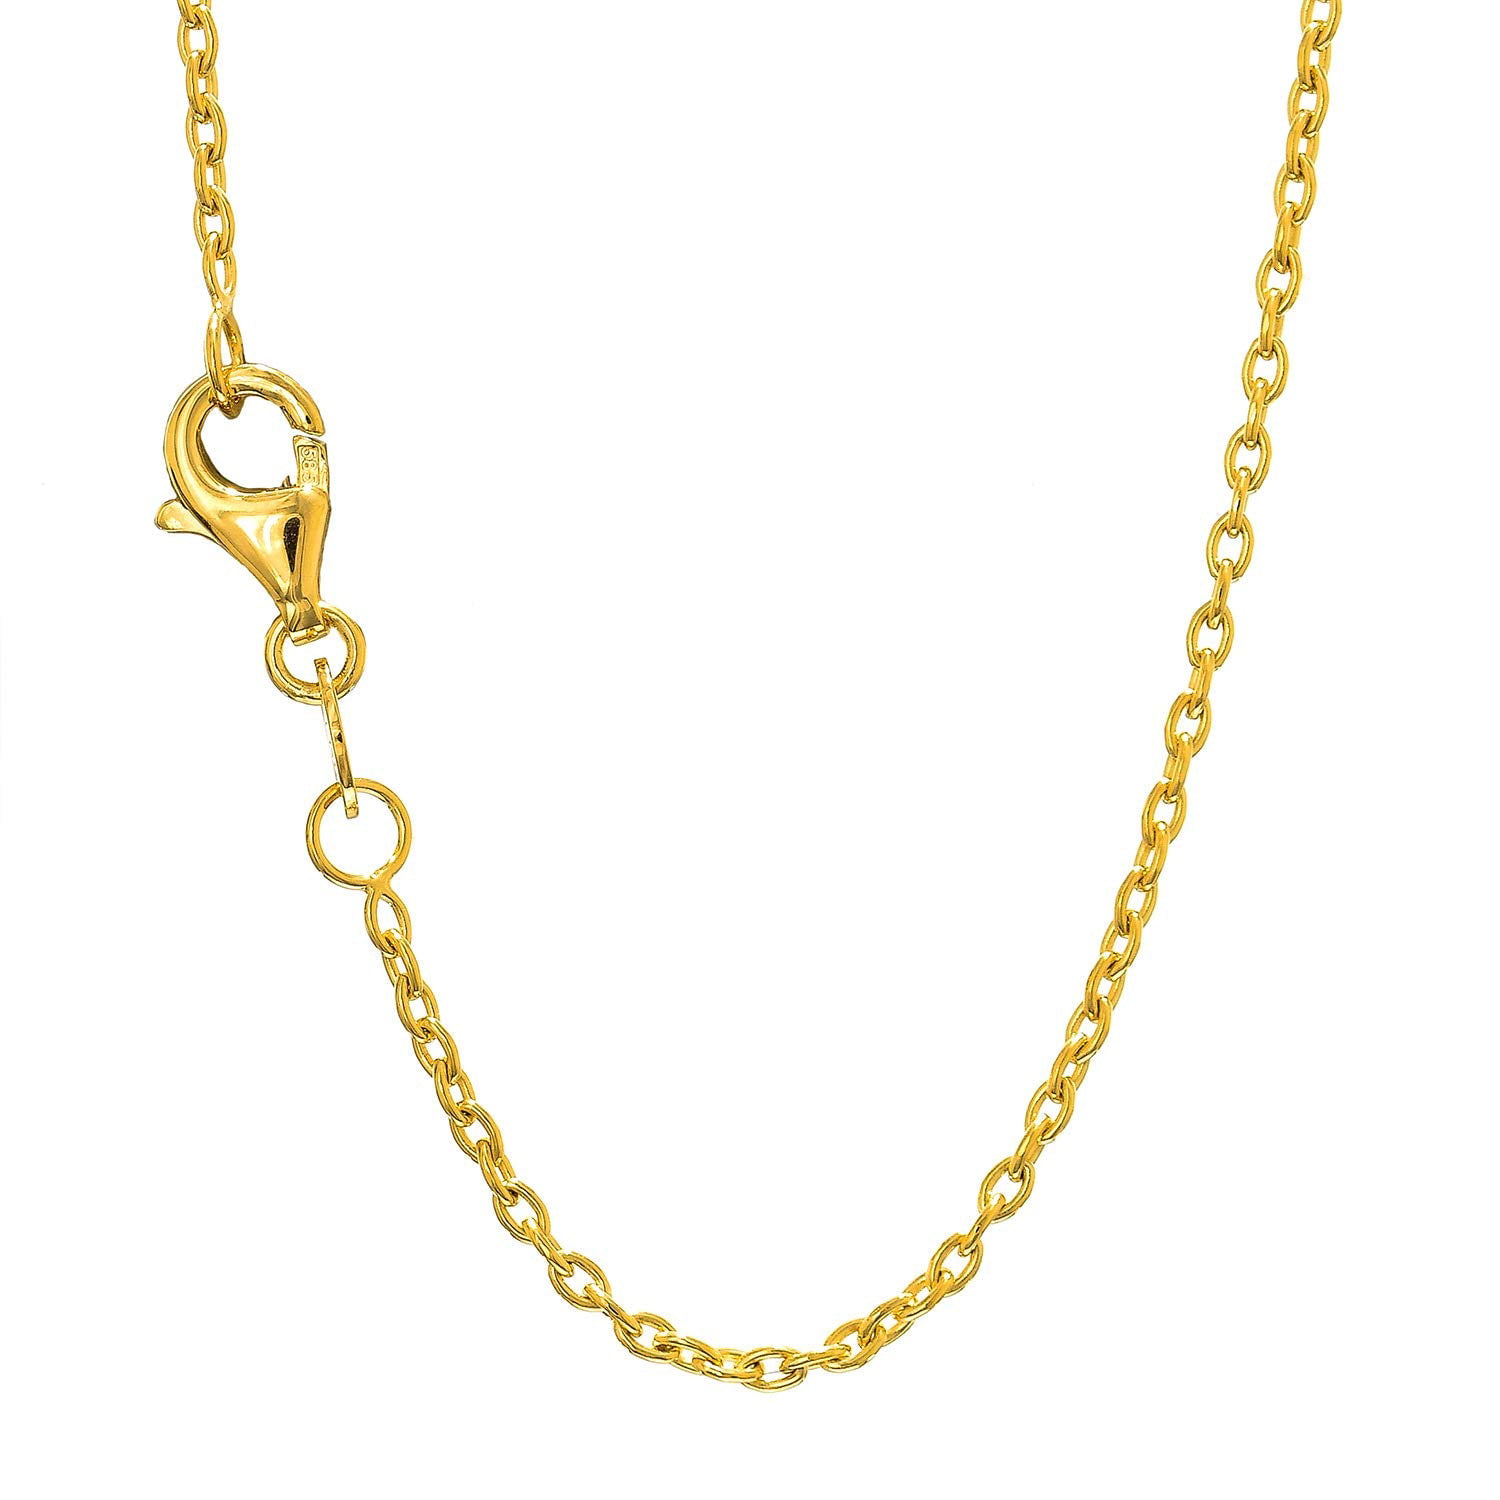 JewelStop 14k Solid Yellow Gold 1.5 Mm Round Cable Chain Necklace